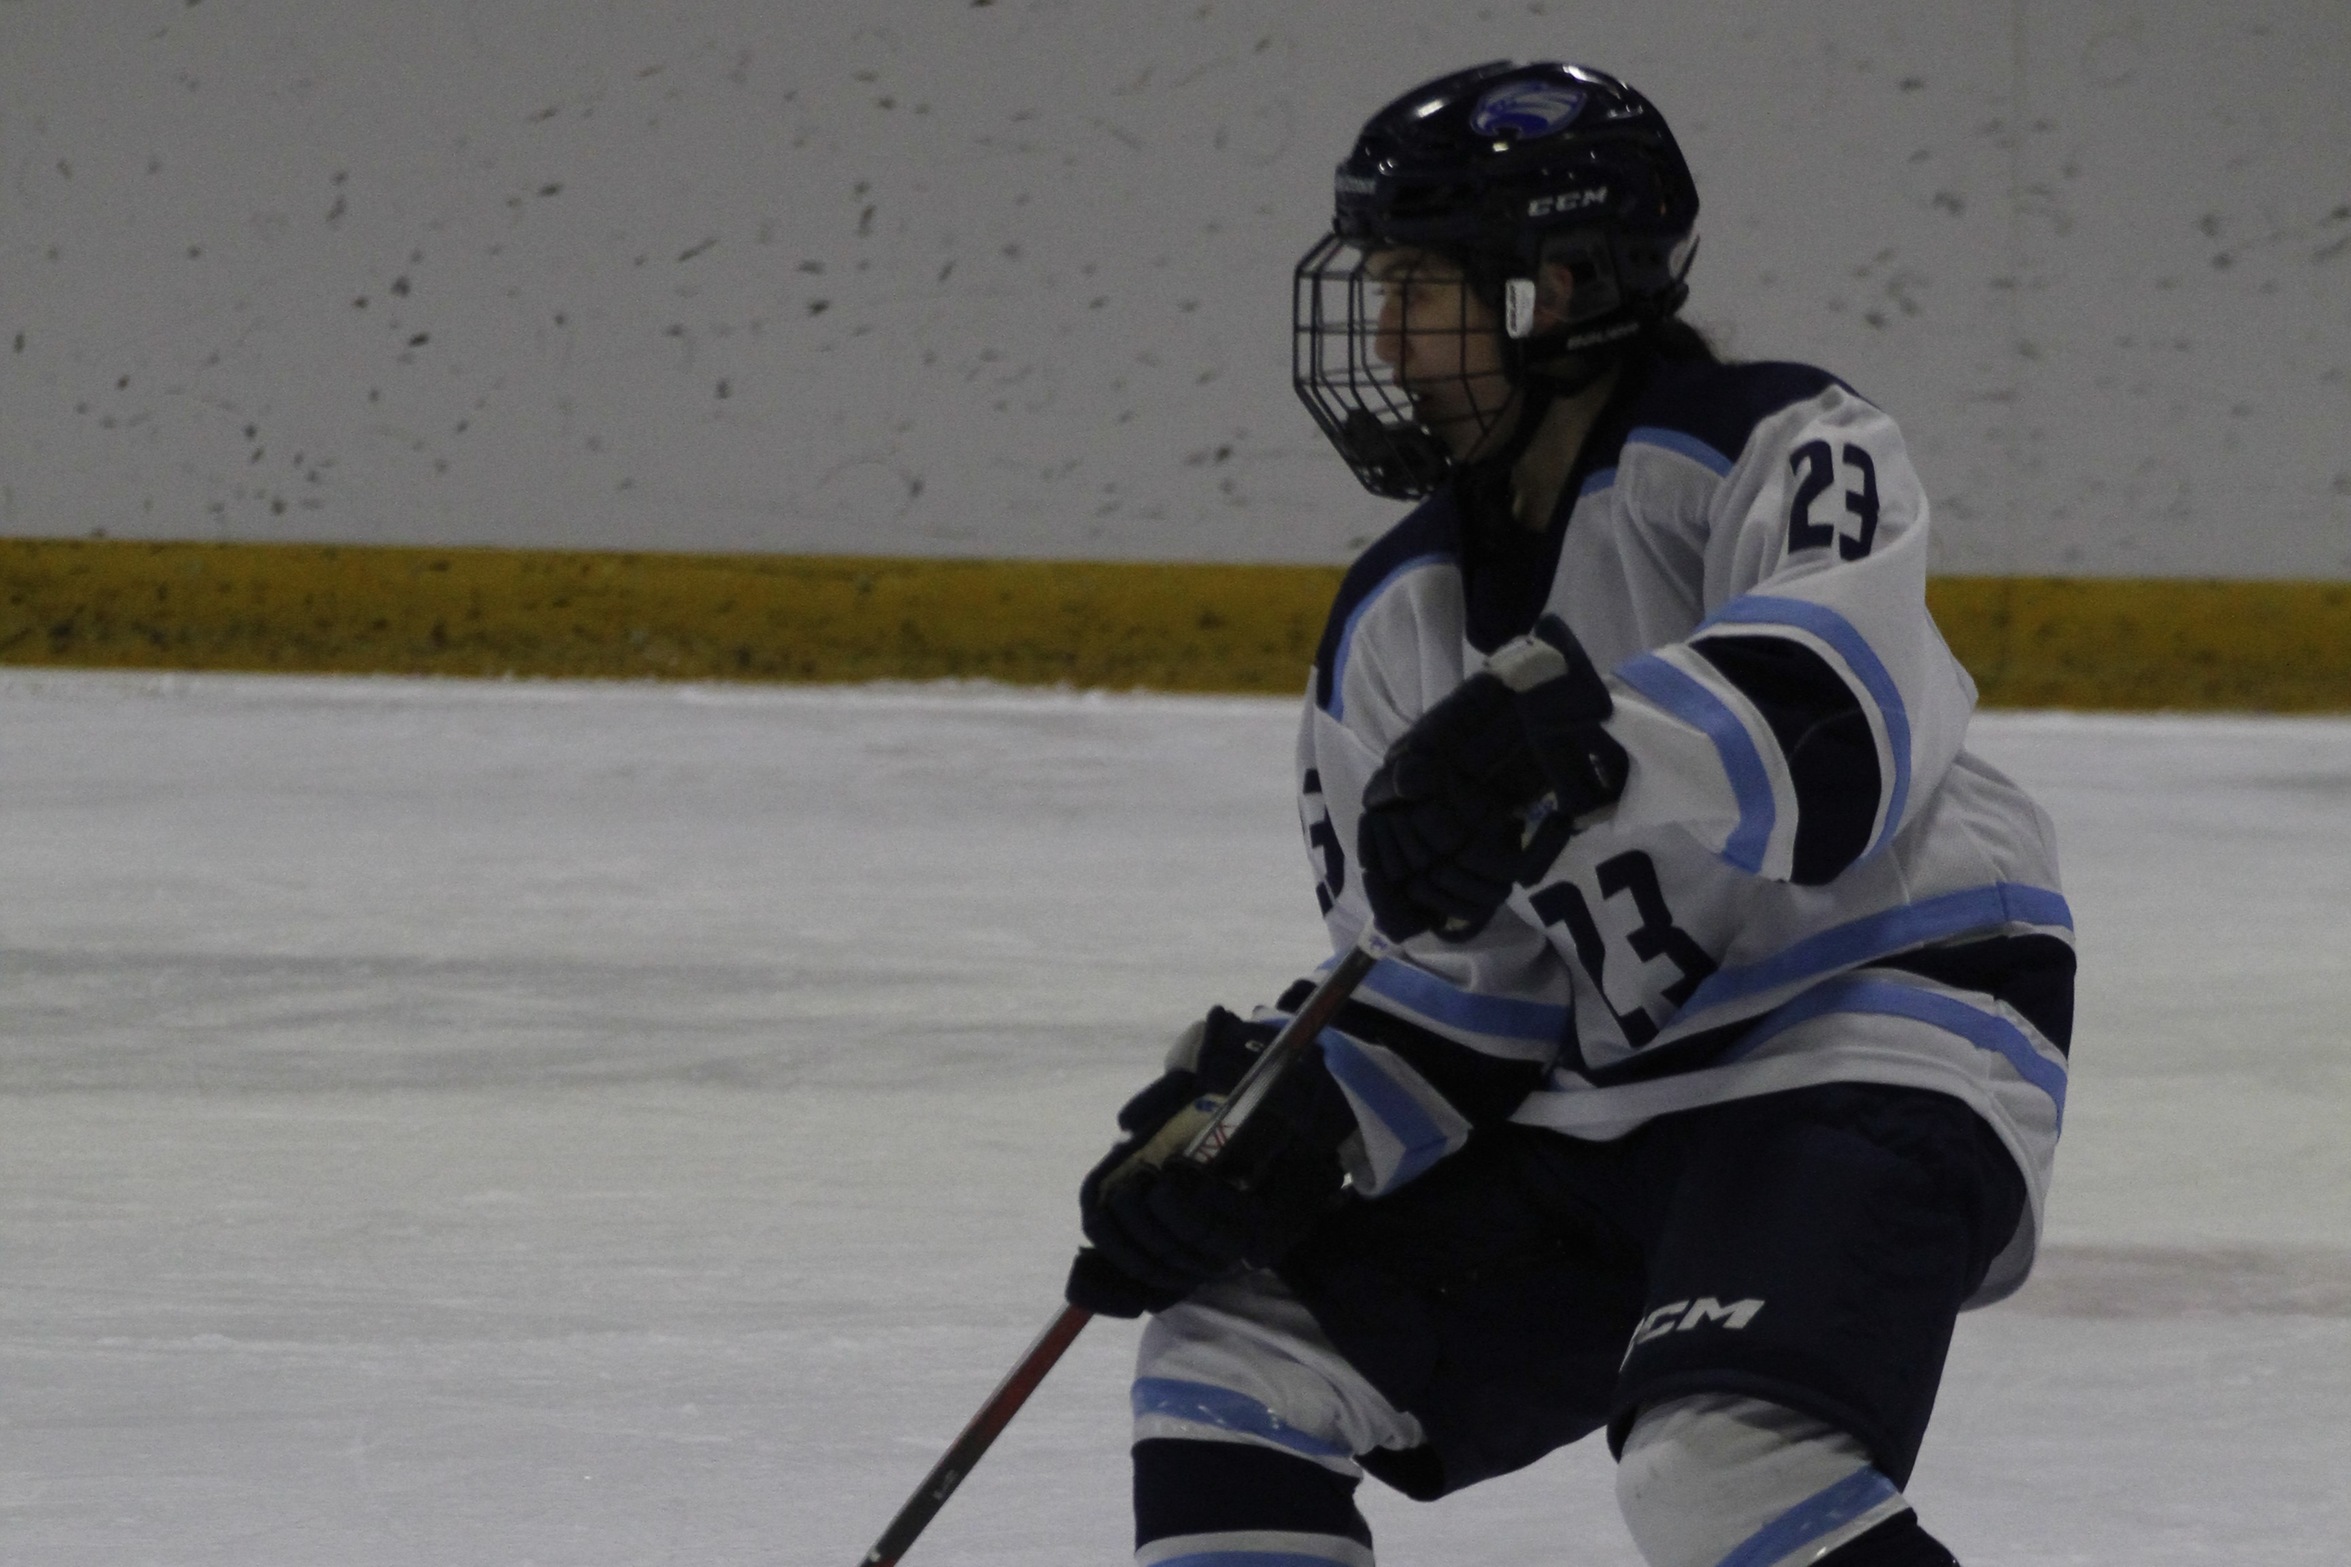 Contreras Scores Twice As Women's Ice Hockey Closes Out Home Season With Win Over King's